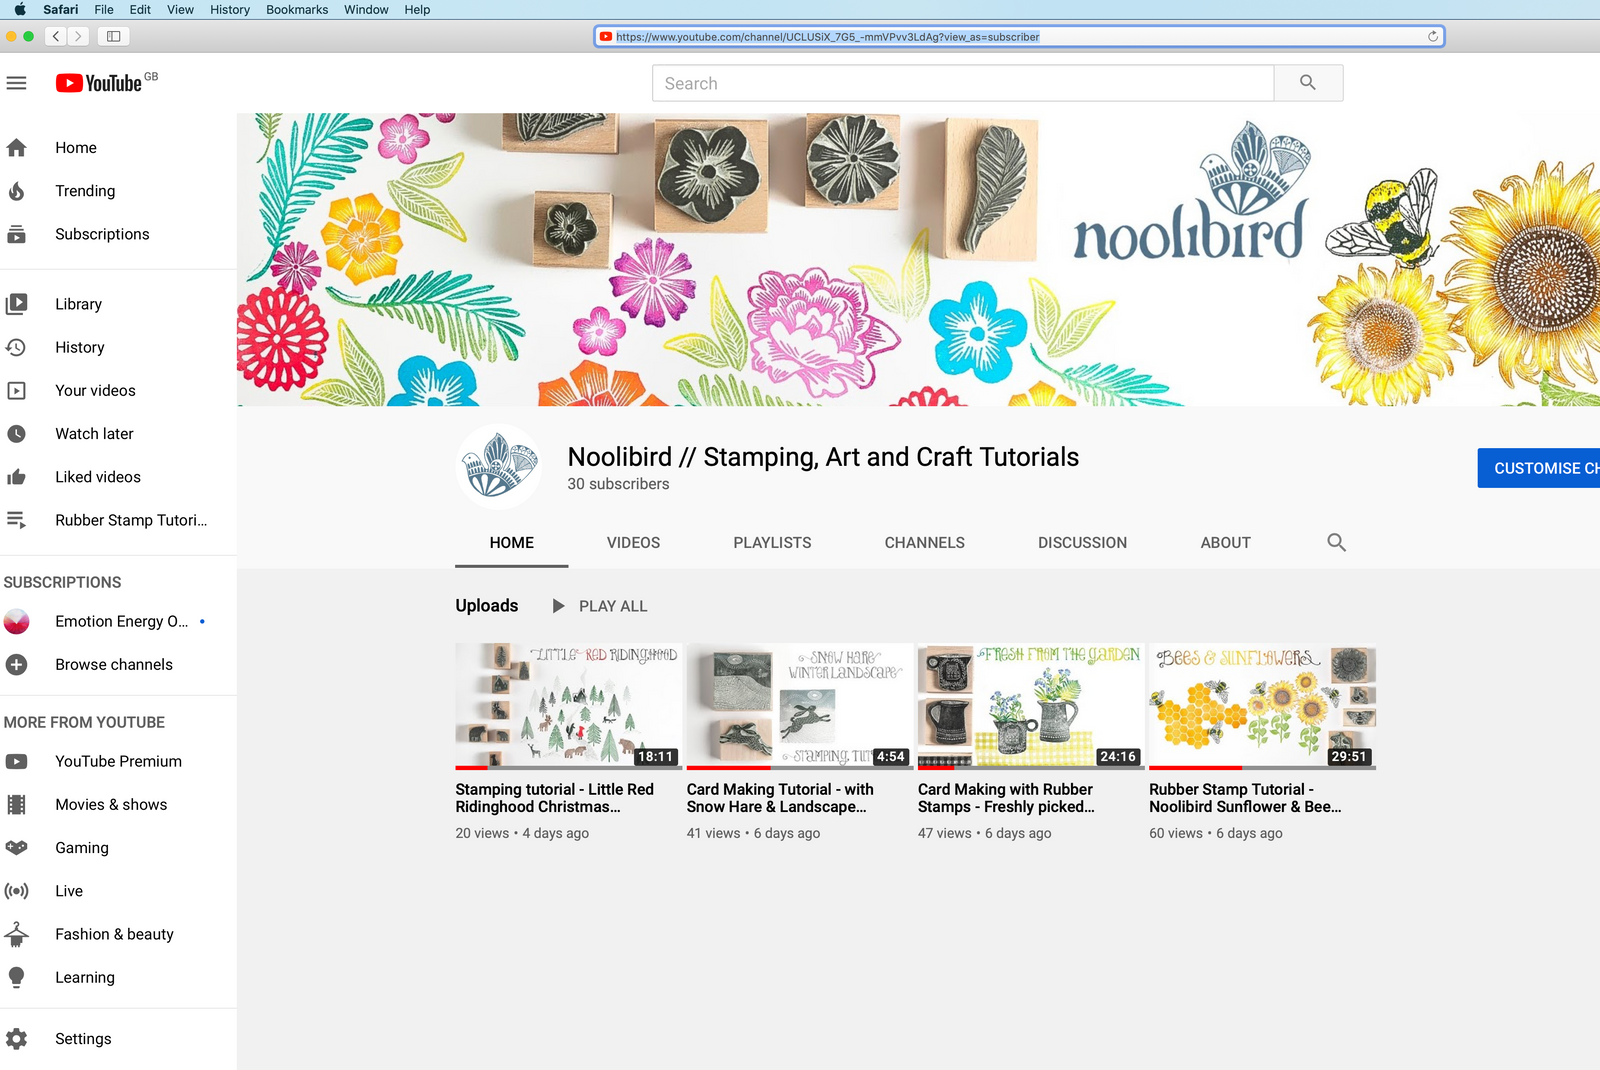 Noolibird has just landed on YouTube...